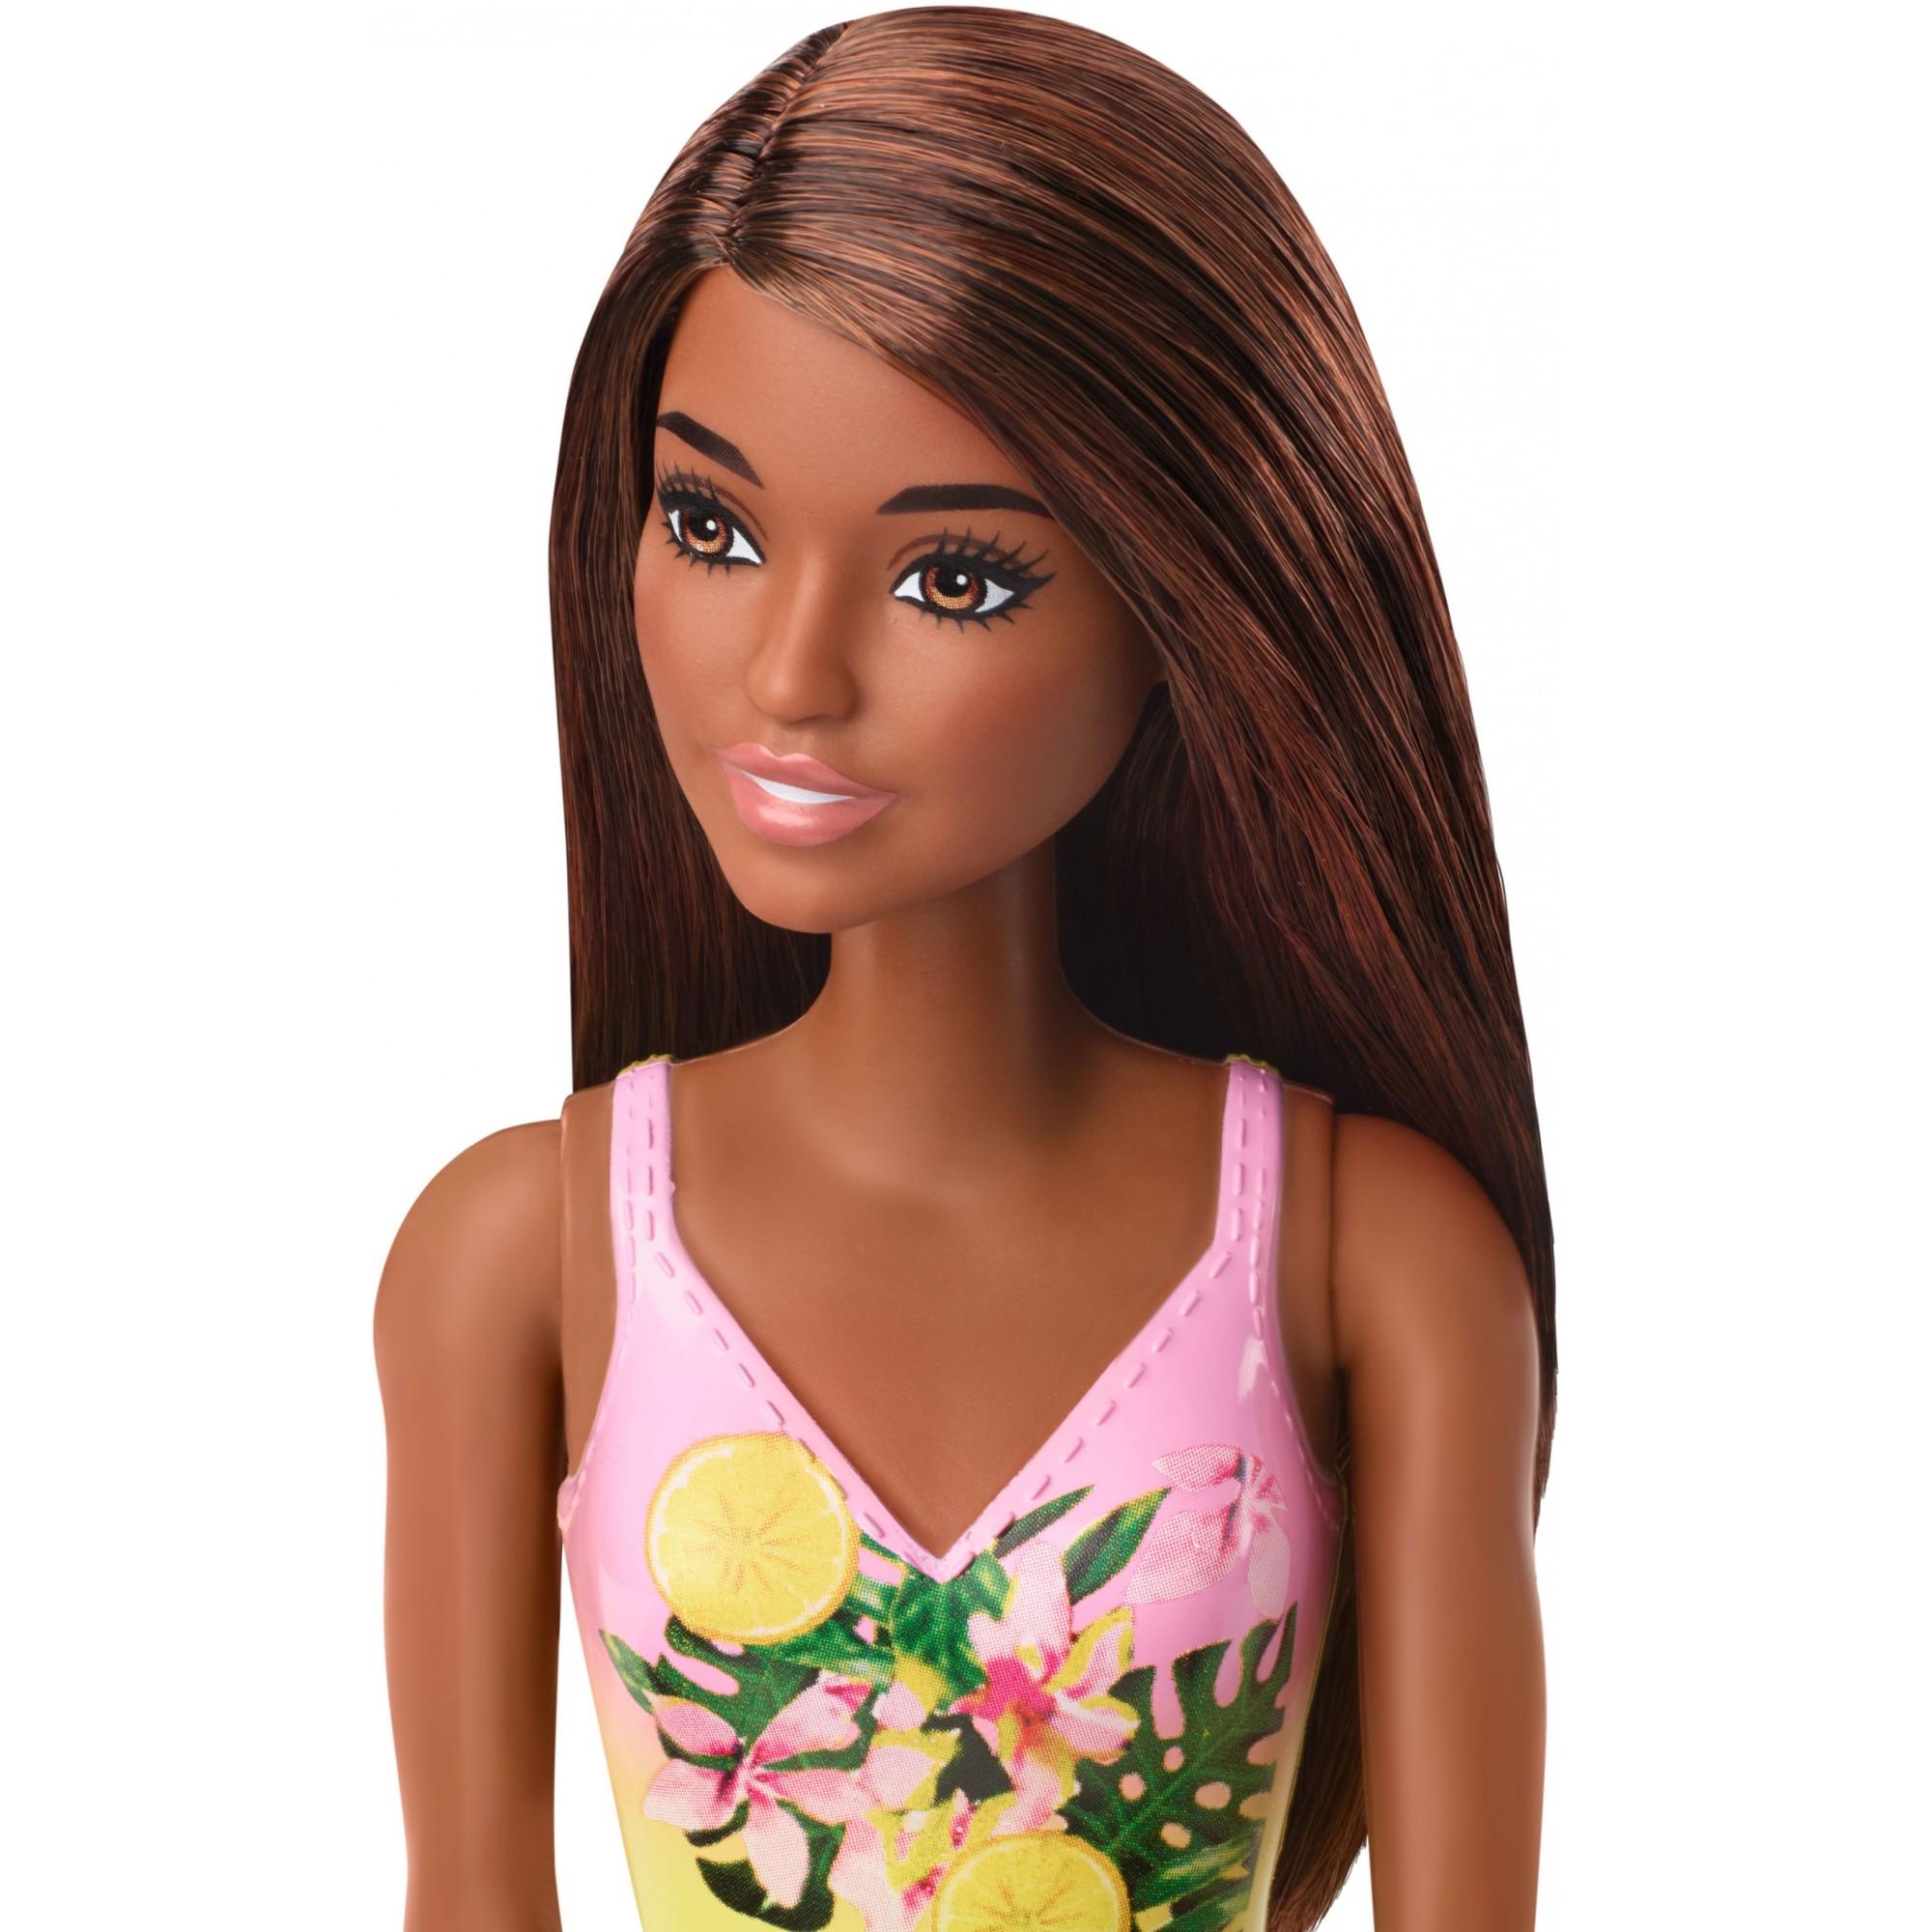 Barbie Swimsuit Beach Doll with Brown Hair & Tropical Floral Print Suit - image 2 of 6